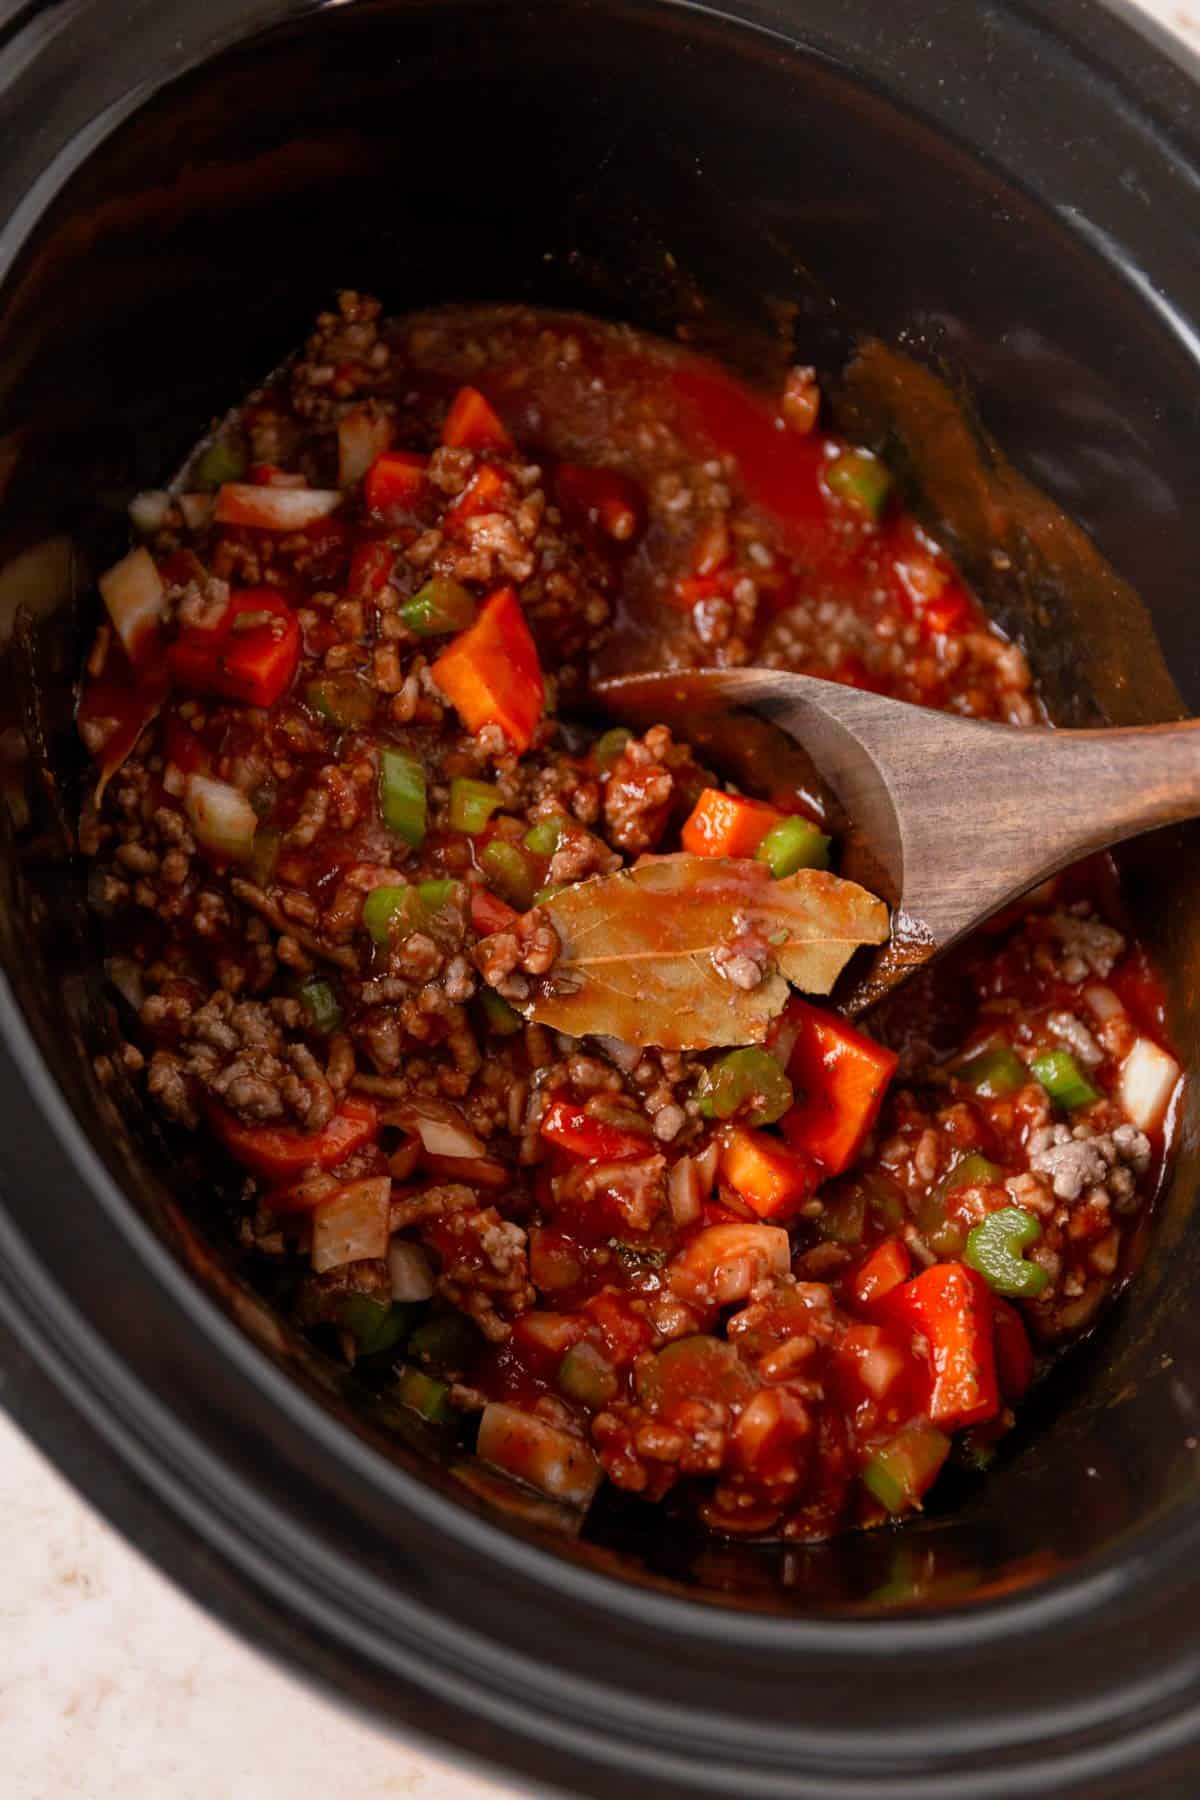 vegetables, tomato sauce and seasonings in slow cooker before cooking